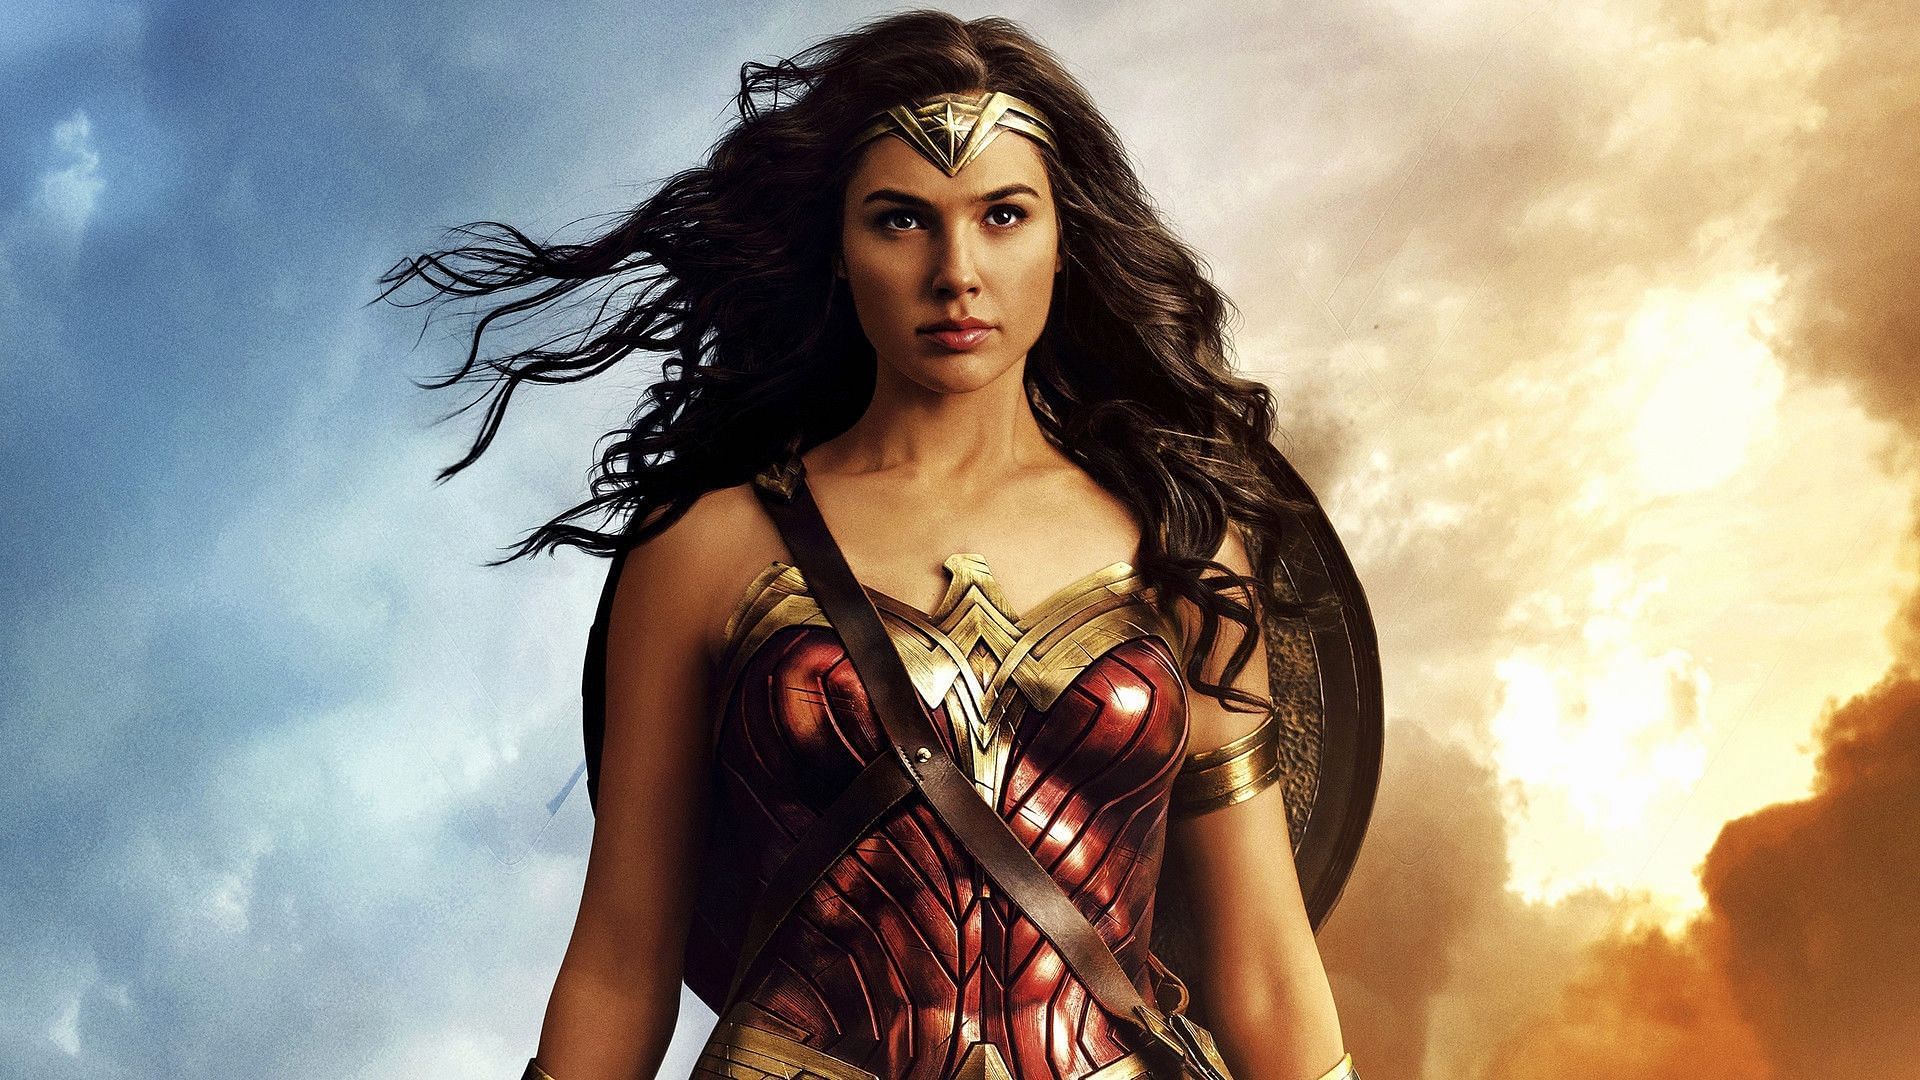 Wonder Woman, the Amazonian warrior princess, stands as an emblem of strength, grace, and justice. (Image via DC)